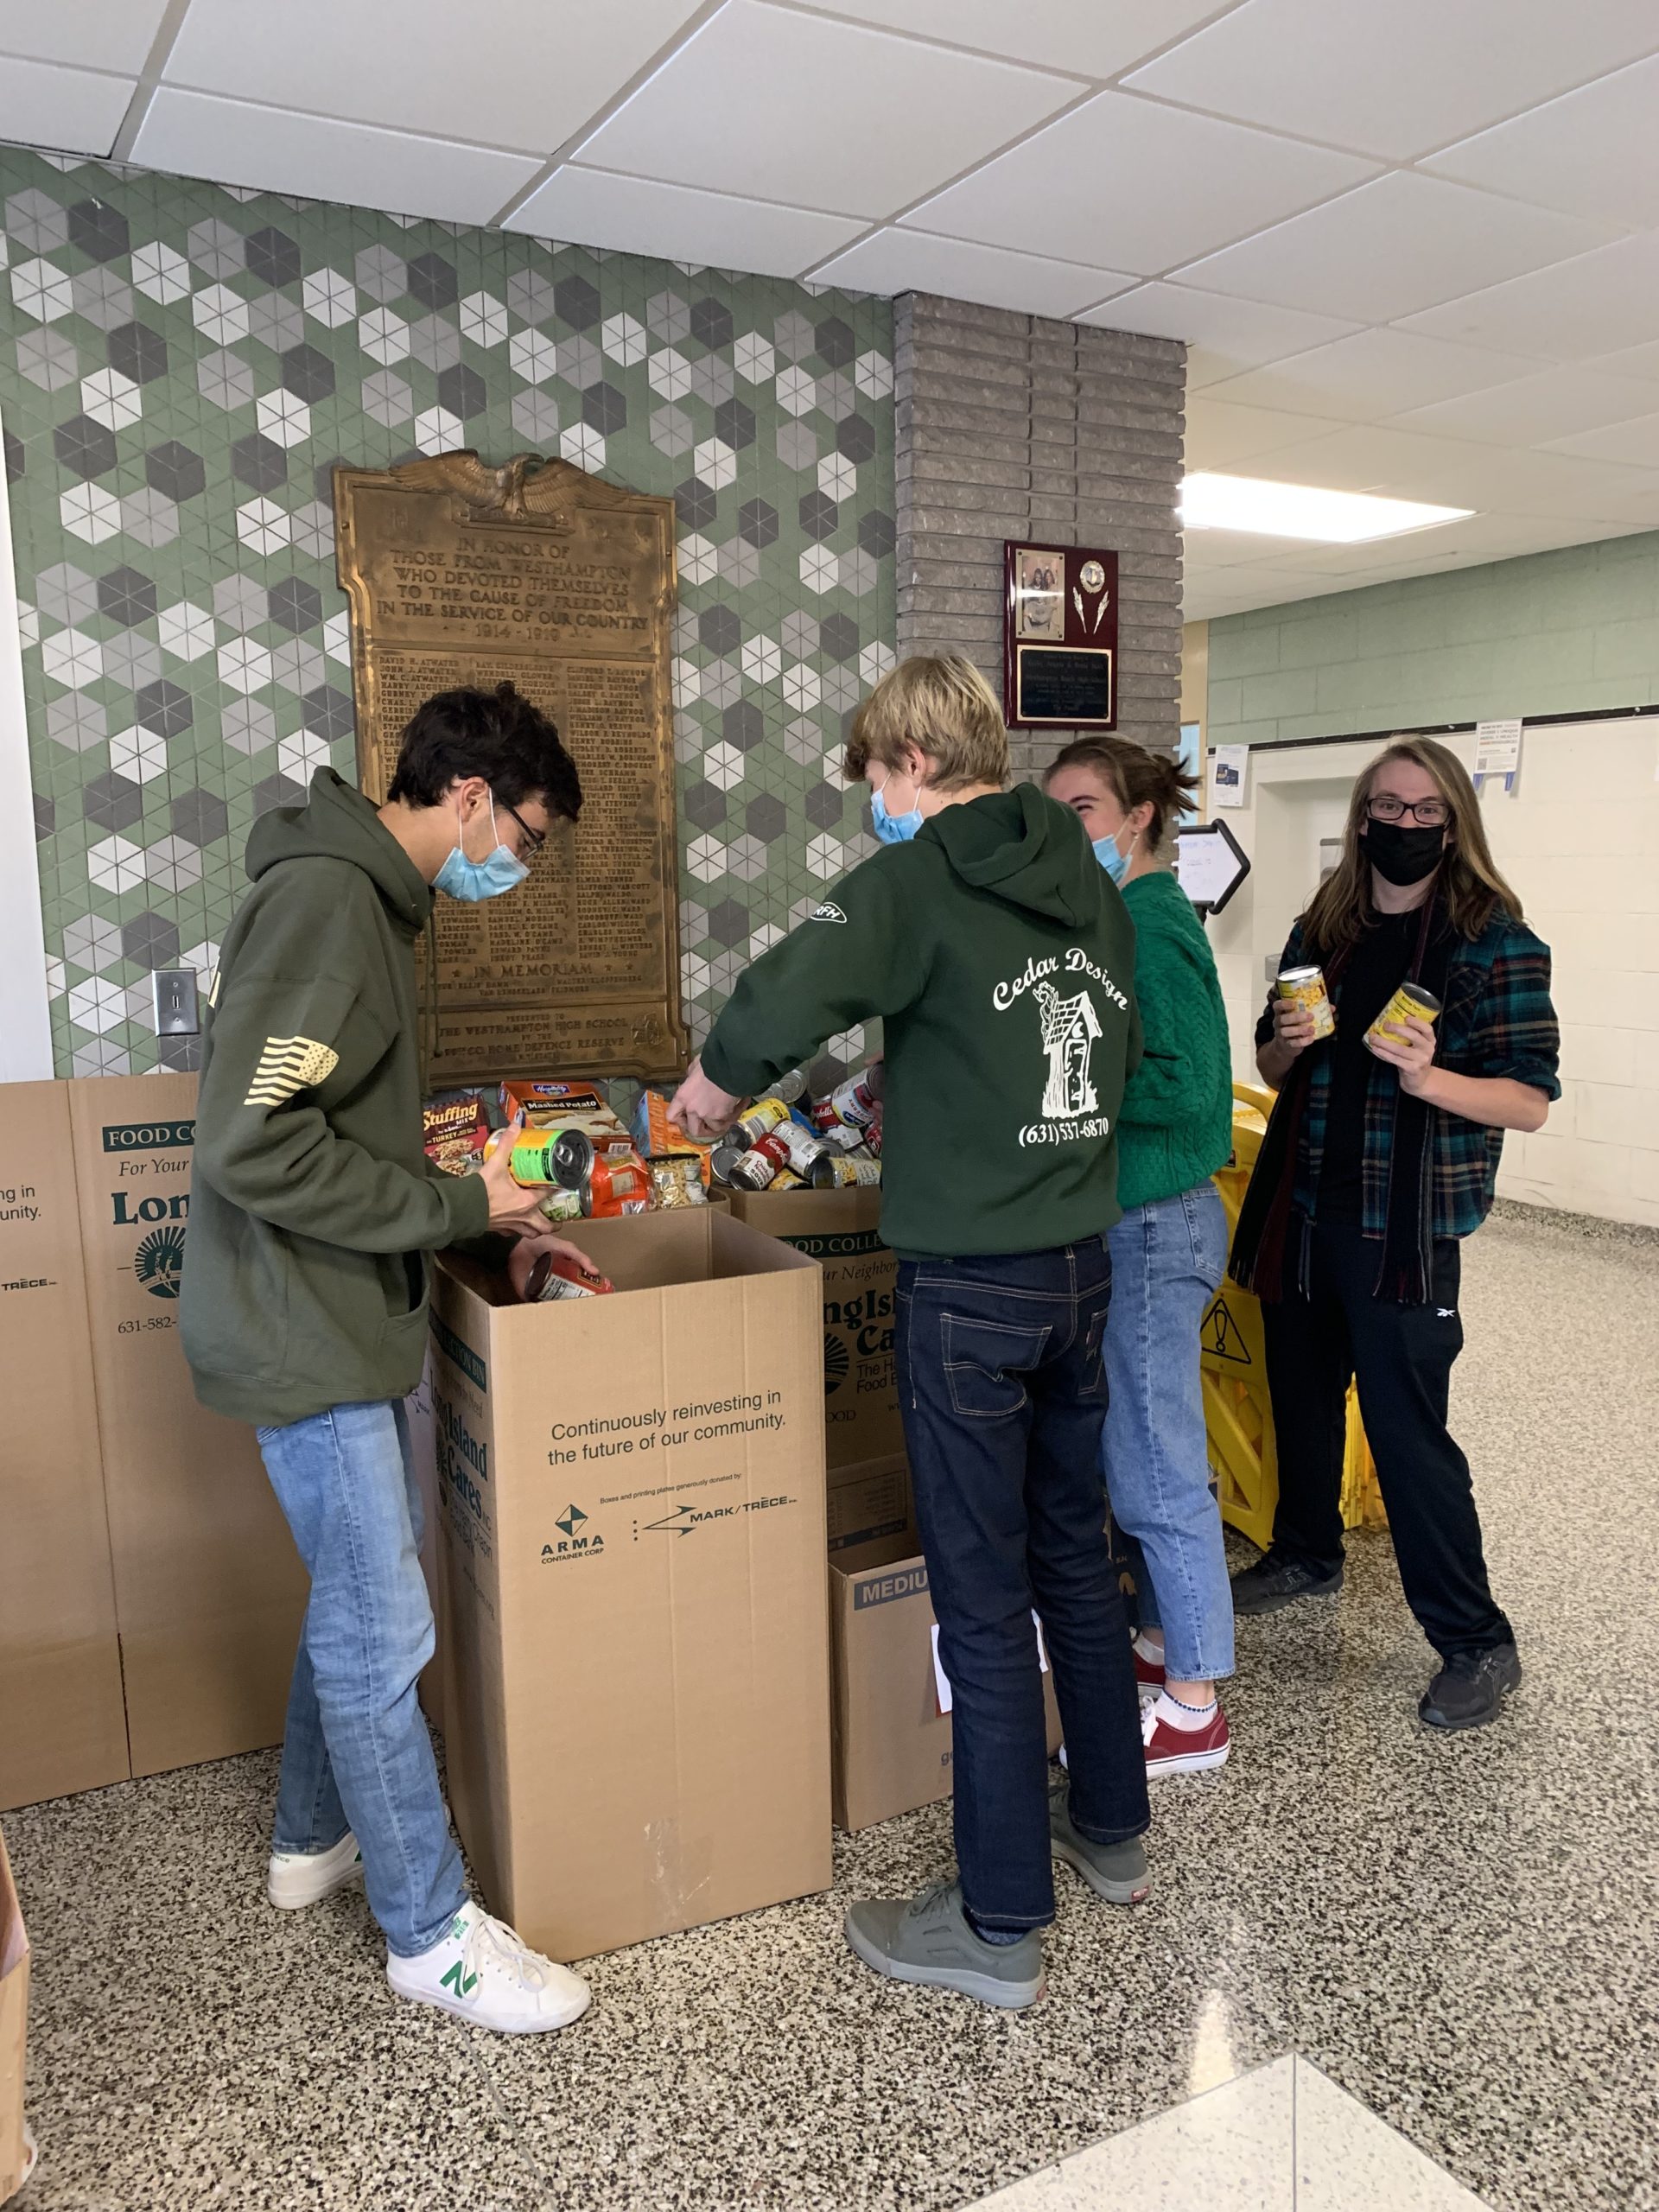 The Westhampton Beach High School National Honor Society recently held a successful holiday food drive in partnership with Long Island Cares. The students collected 789 food items that will be donated to local families in need.